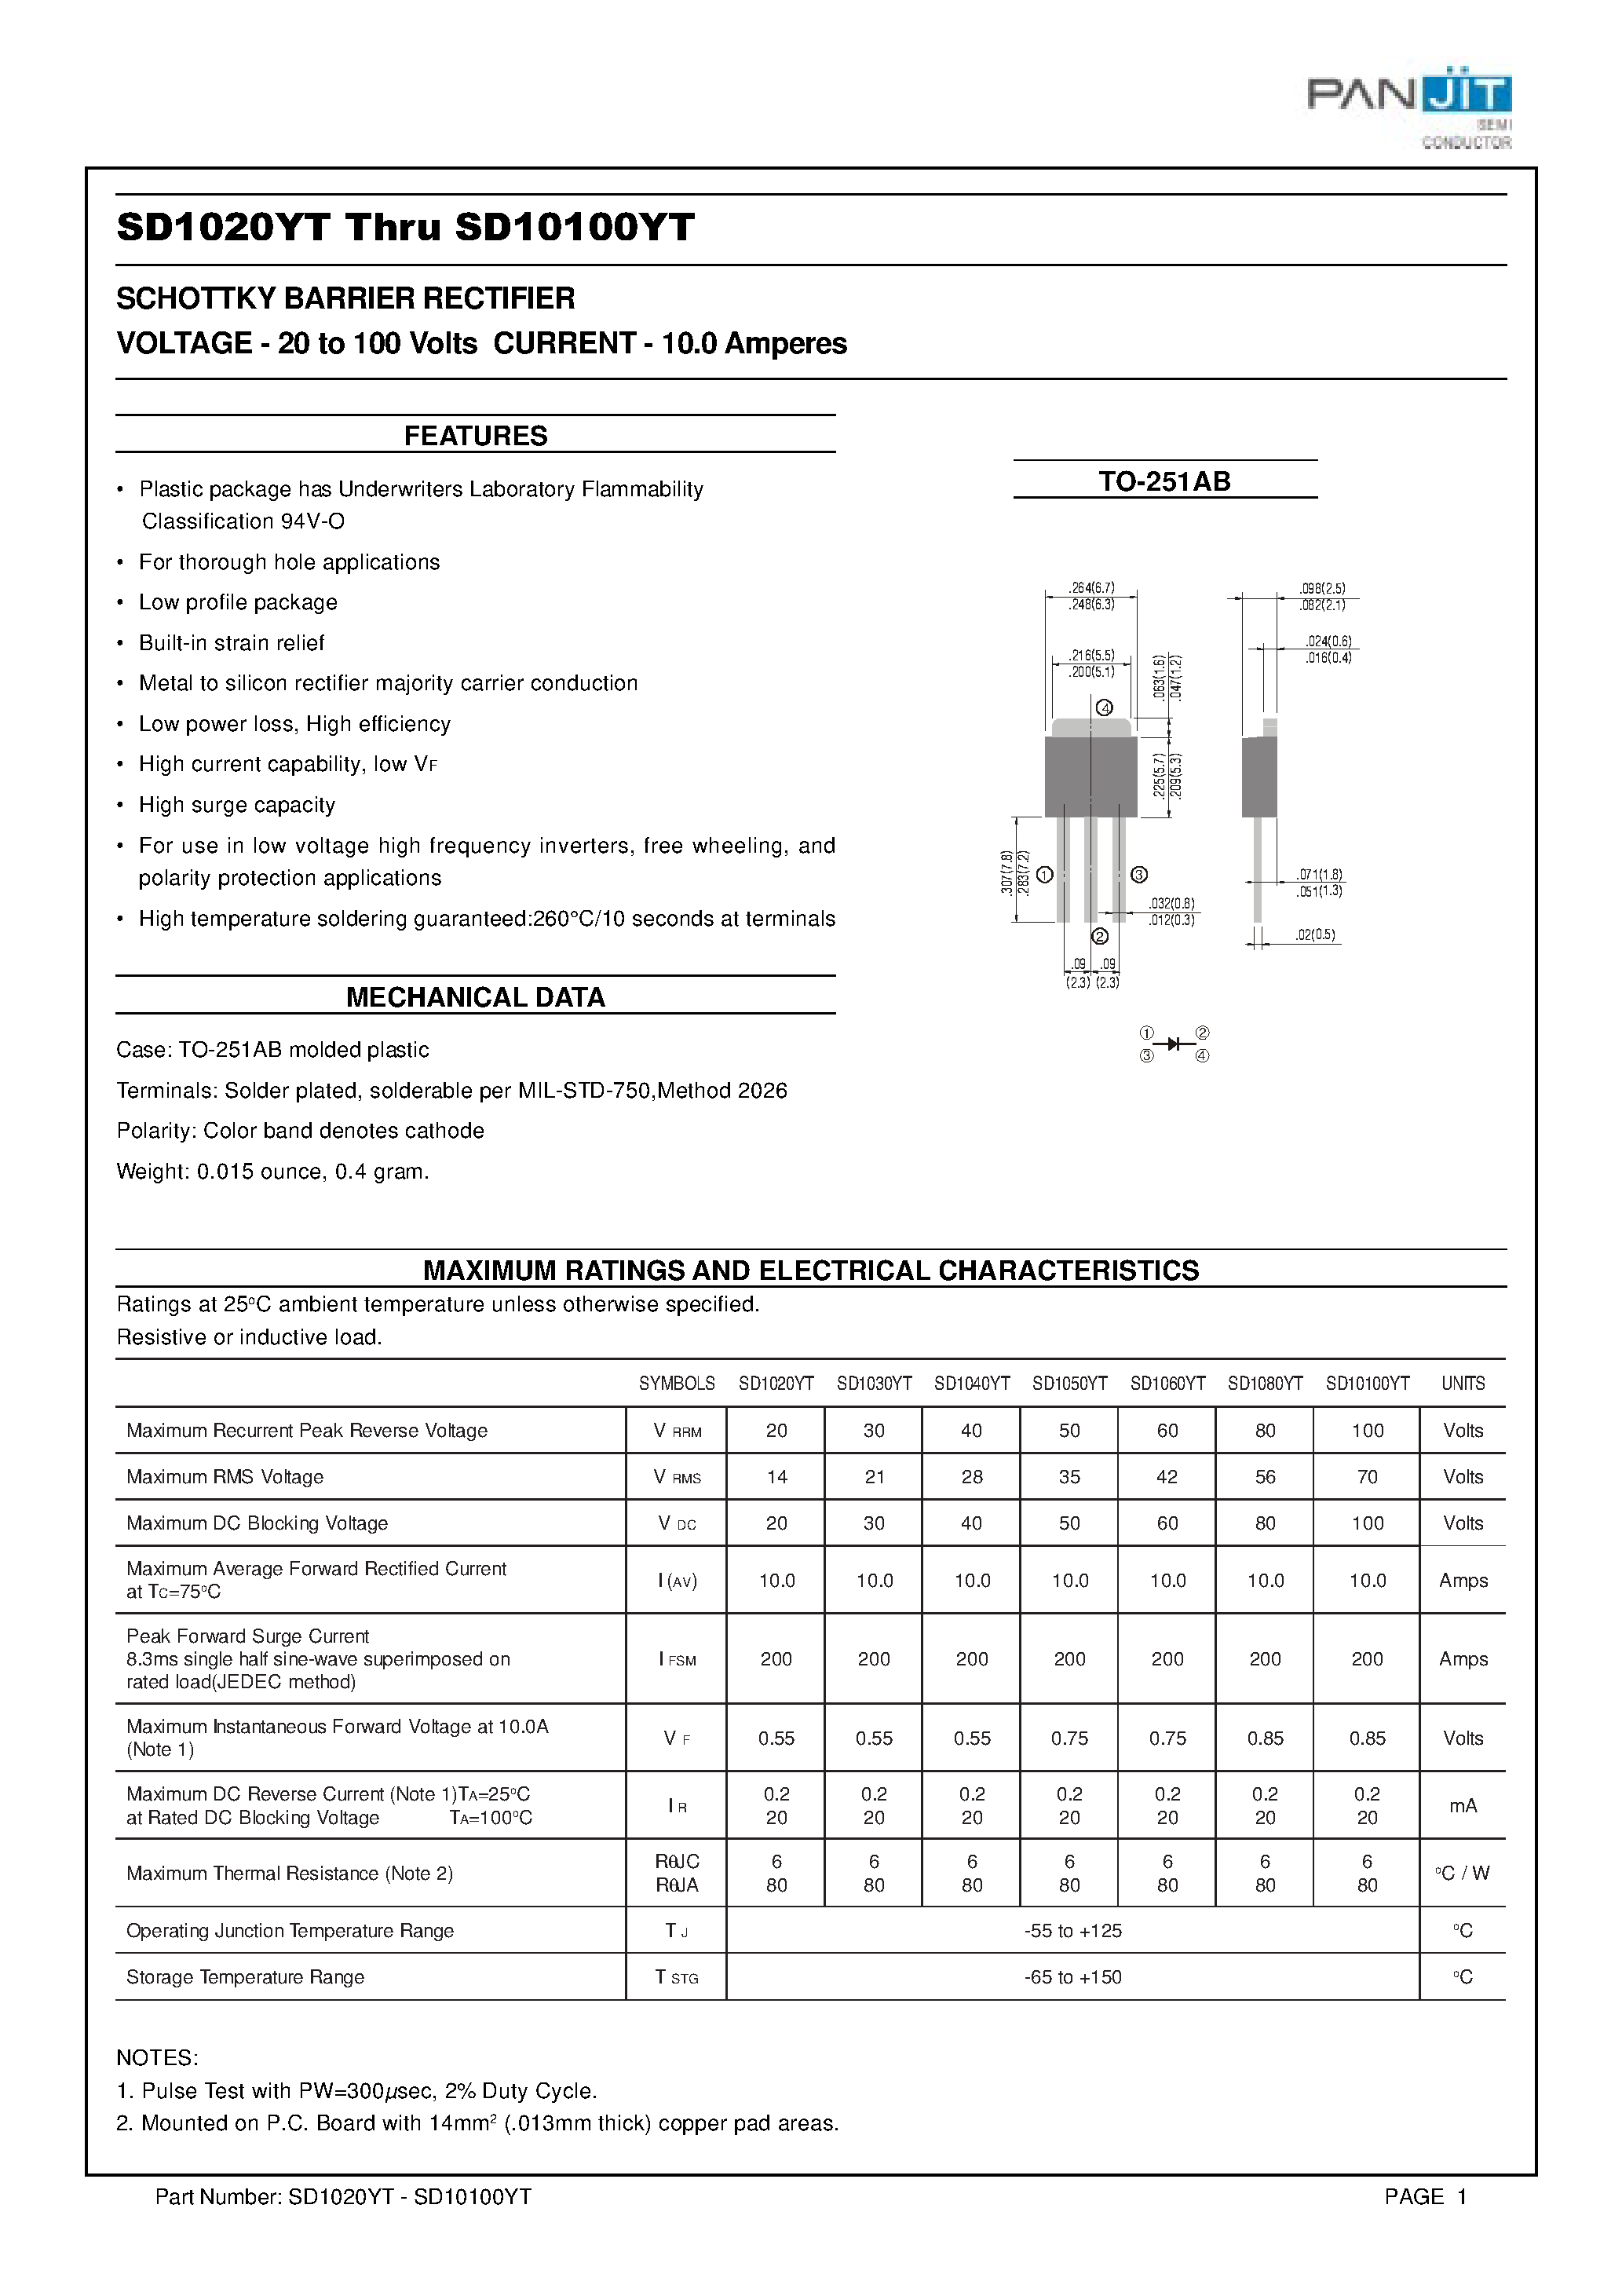 Datasheet SD10100YT - (SD1020YT - SD10100YT) SCHOTTKY BARRIER RECTIFIER page 1